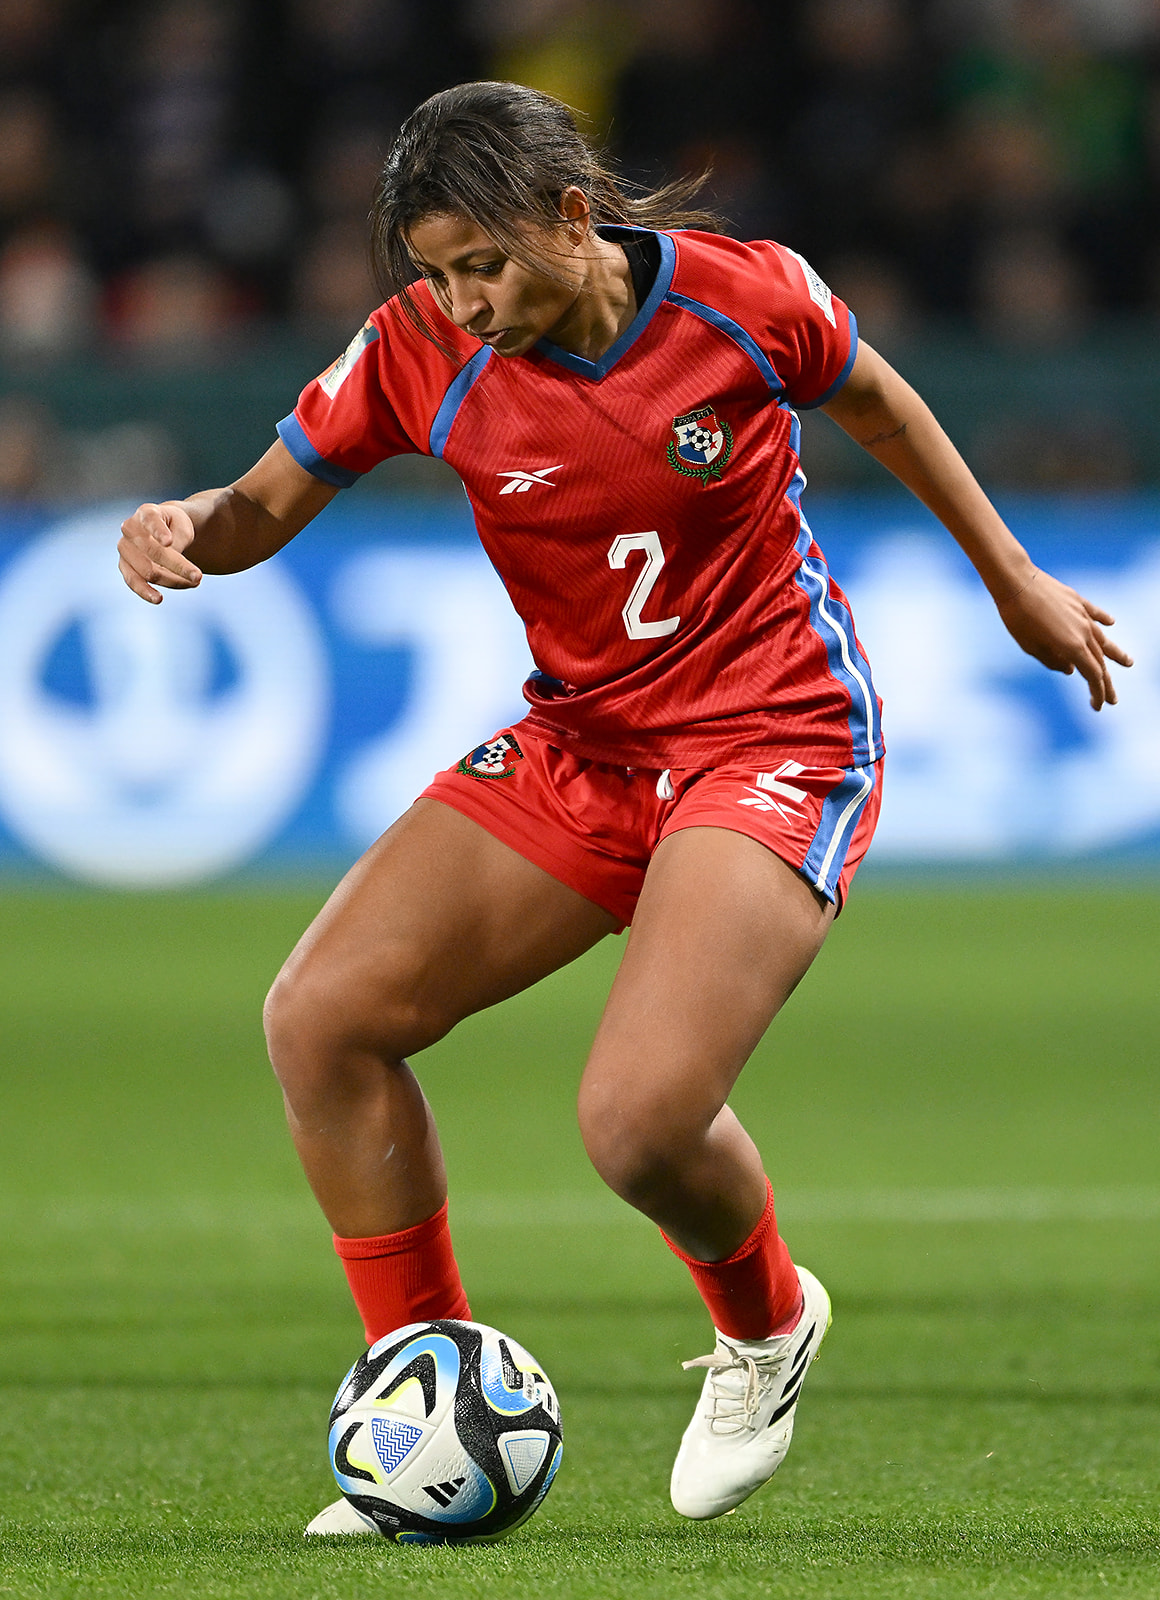 Hilary Jaen of Panama in action during the FIFA Women's World Cup Australia & New Zealand 2023.